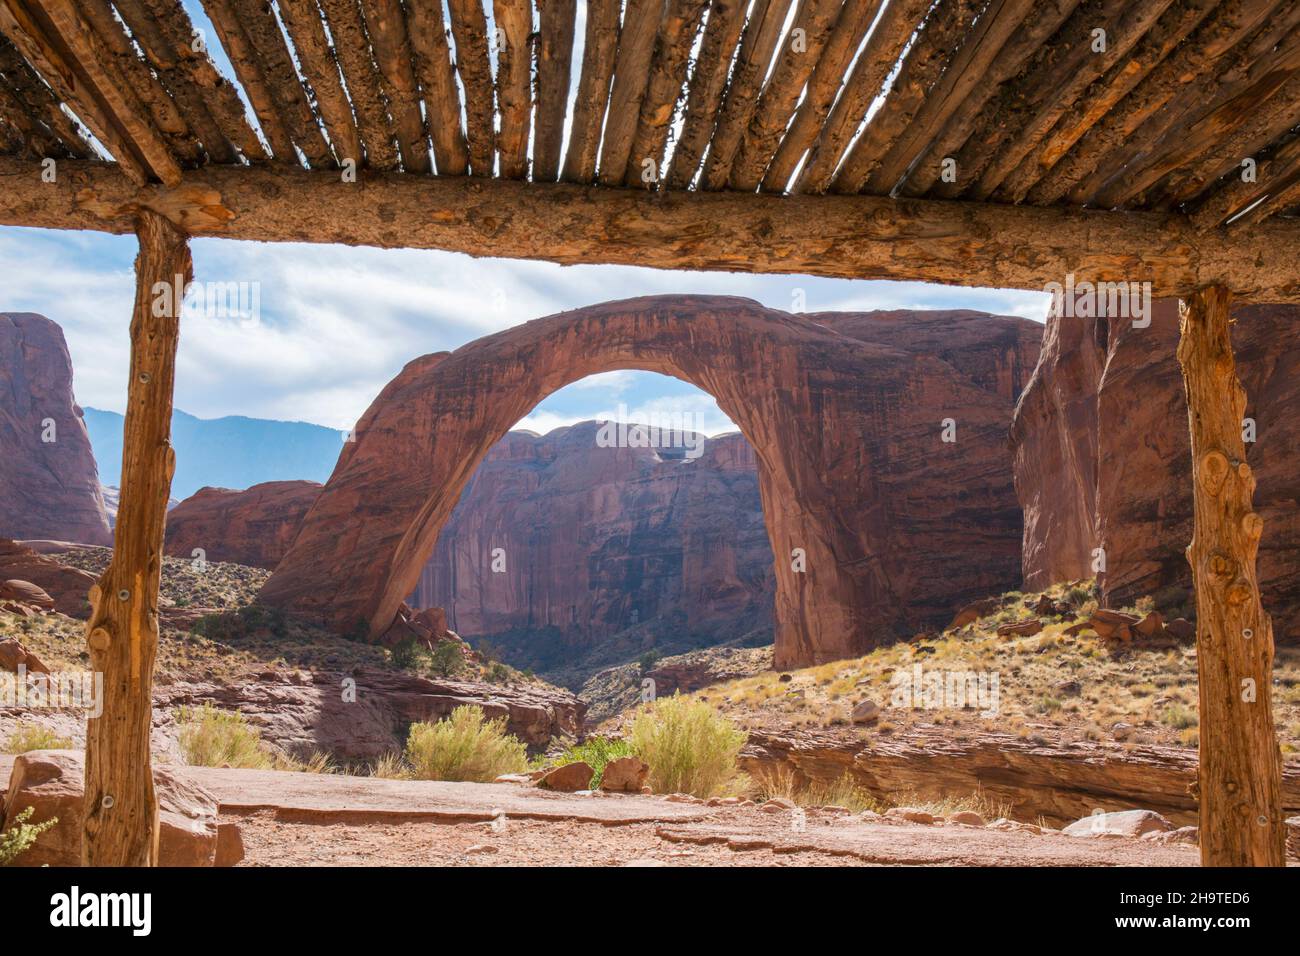 Glen Canyon National Recreation Area, Utah, USA. The huge sandstone arch of Rainbow Bridge National Monument framed by wooden shelter. Stock Photo